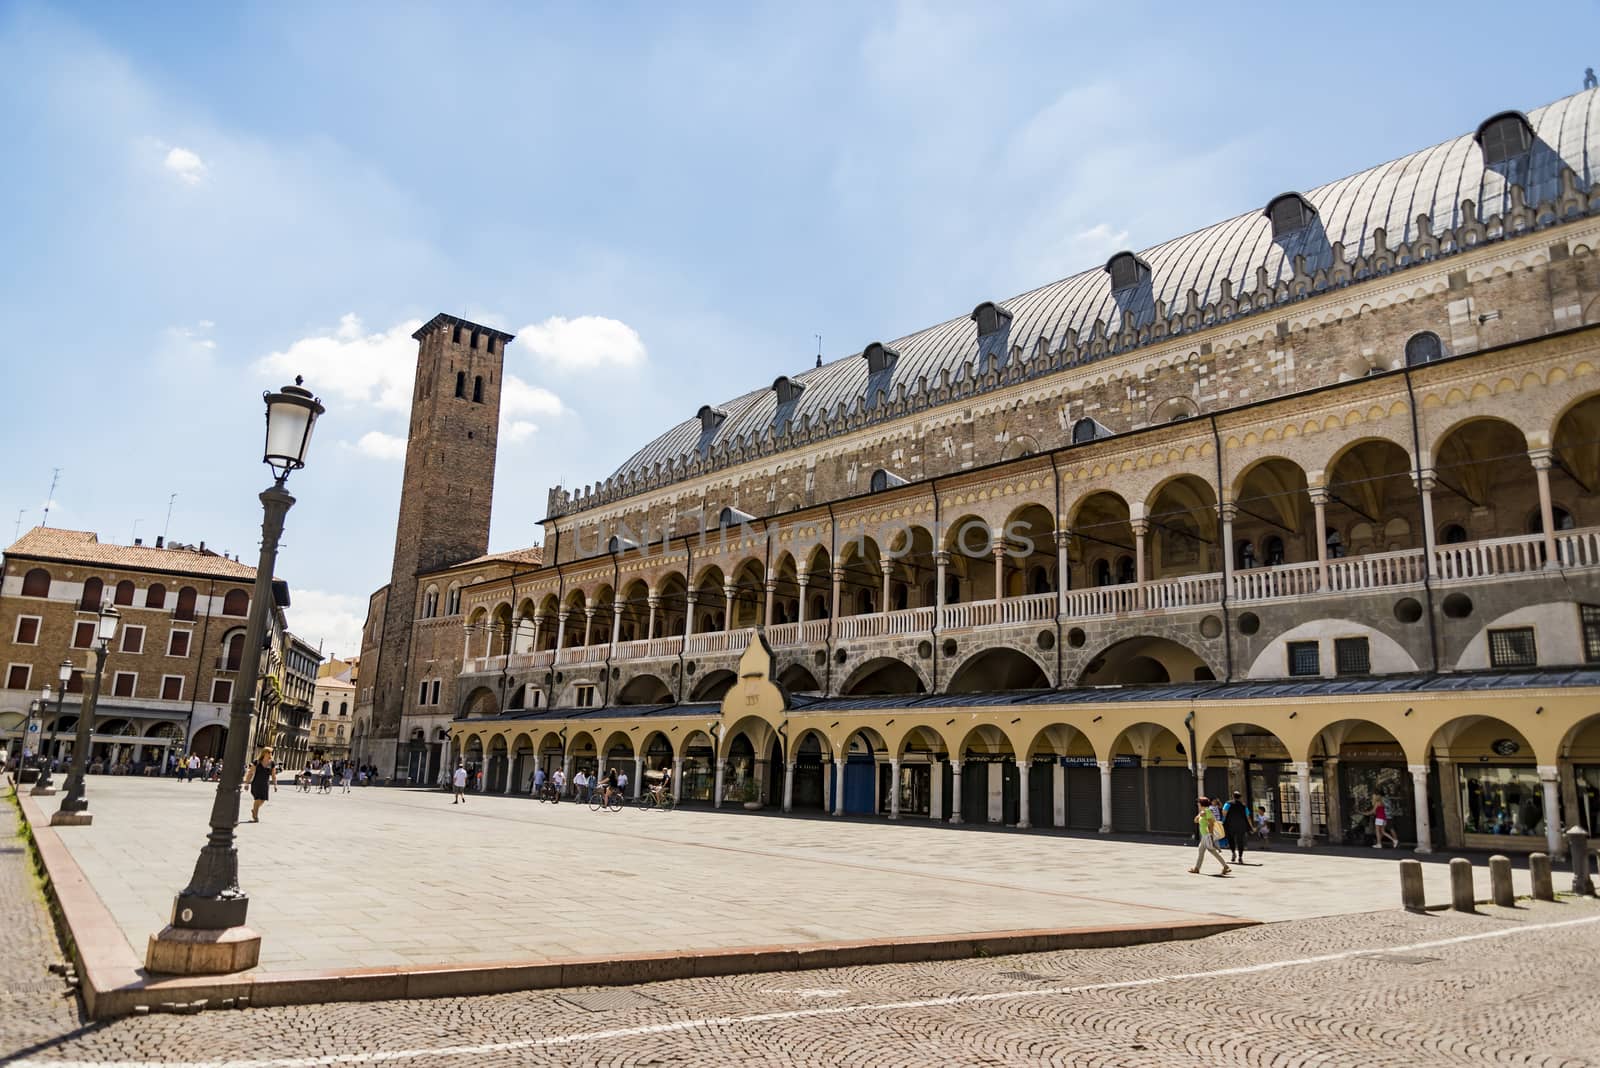 PADUA, ITALY - JULY 2, 2017: The Palazzo della Ragione is old town hall, located on the territory of the city market, between two squares Piazza della Frutta and della Erbe, on July 2, 2017 in Padua.